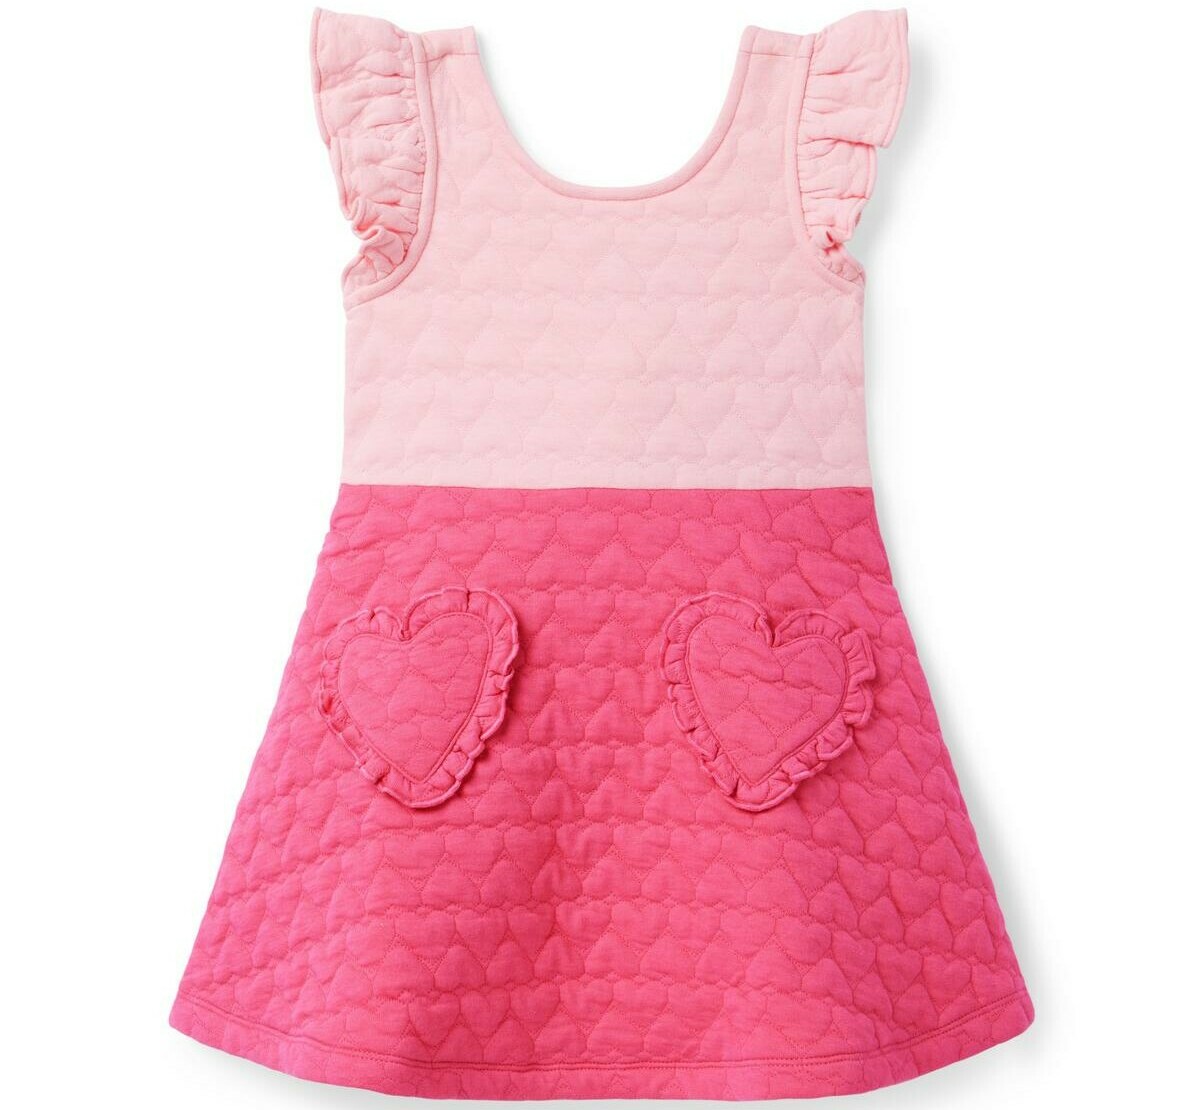 quilted heart dress from Janie and Jack